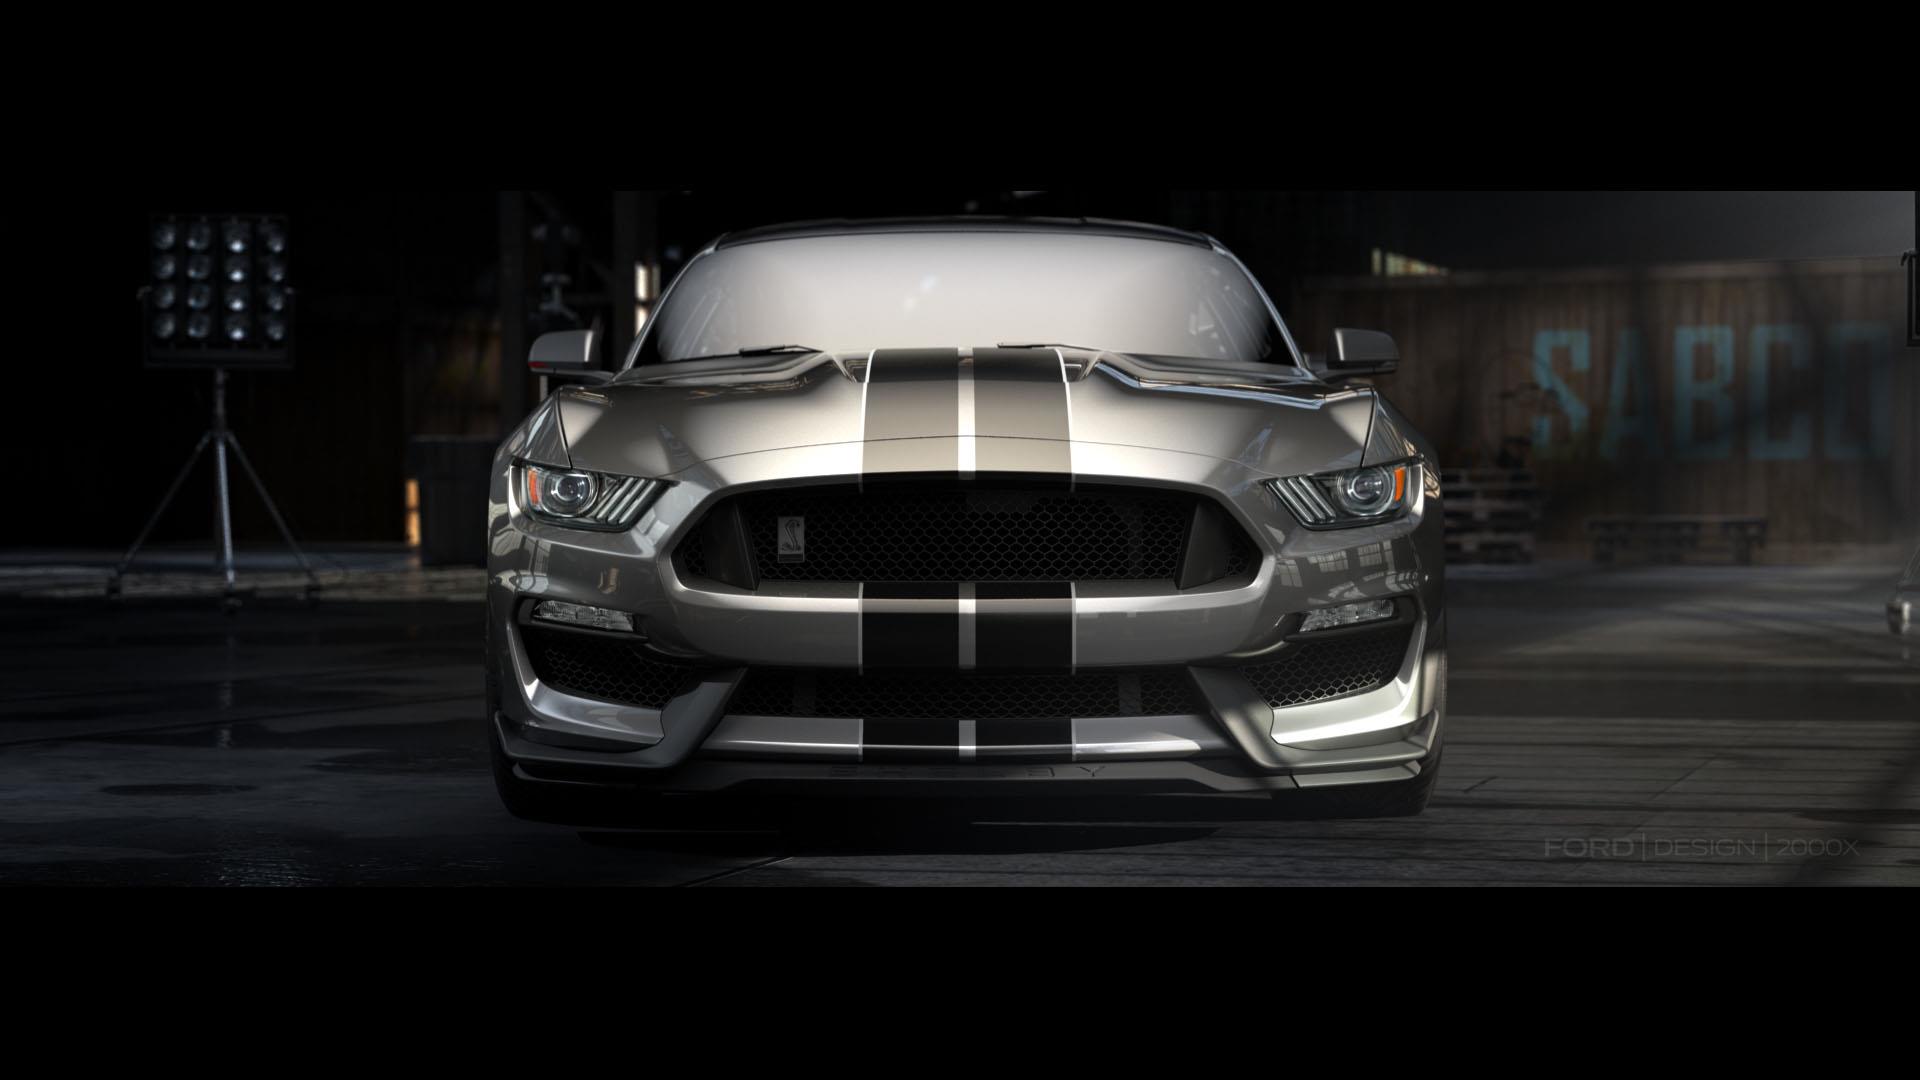 Ford Mustang Shelby Gt350 Conceptcarz